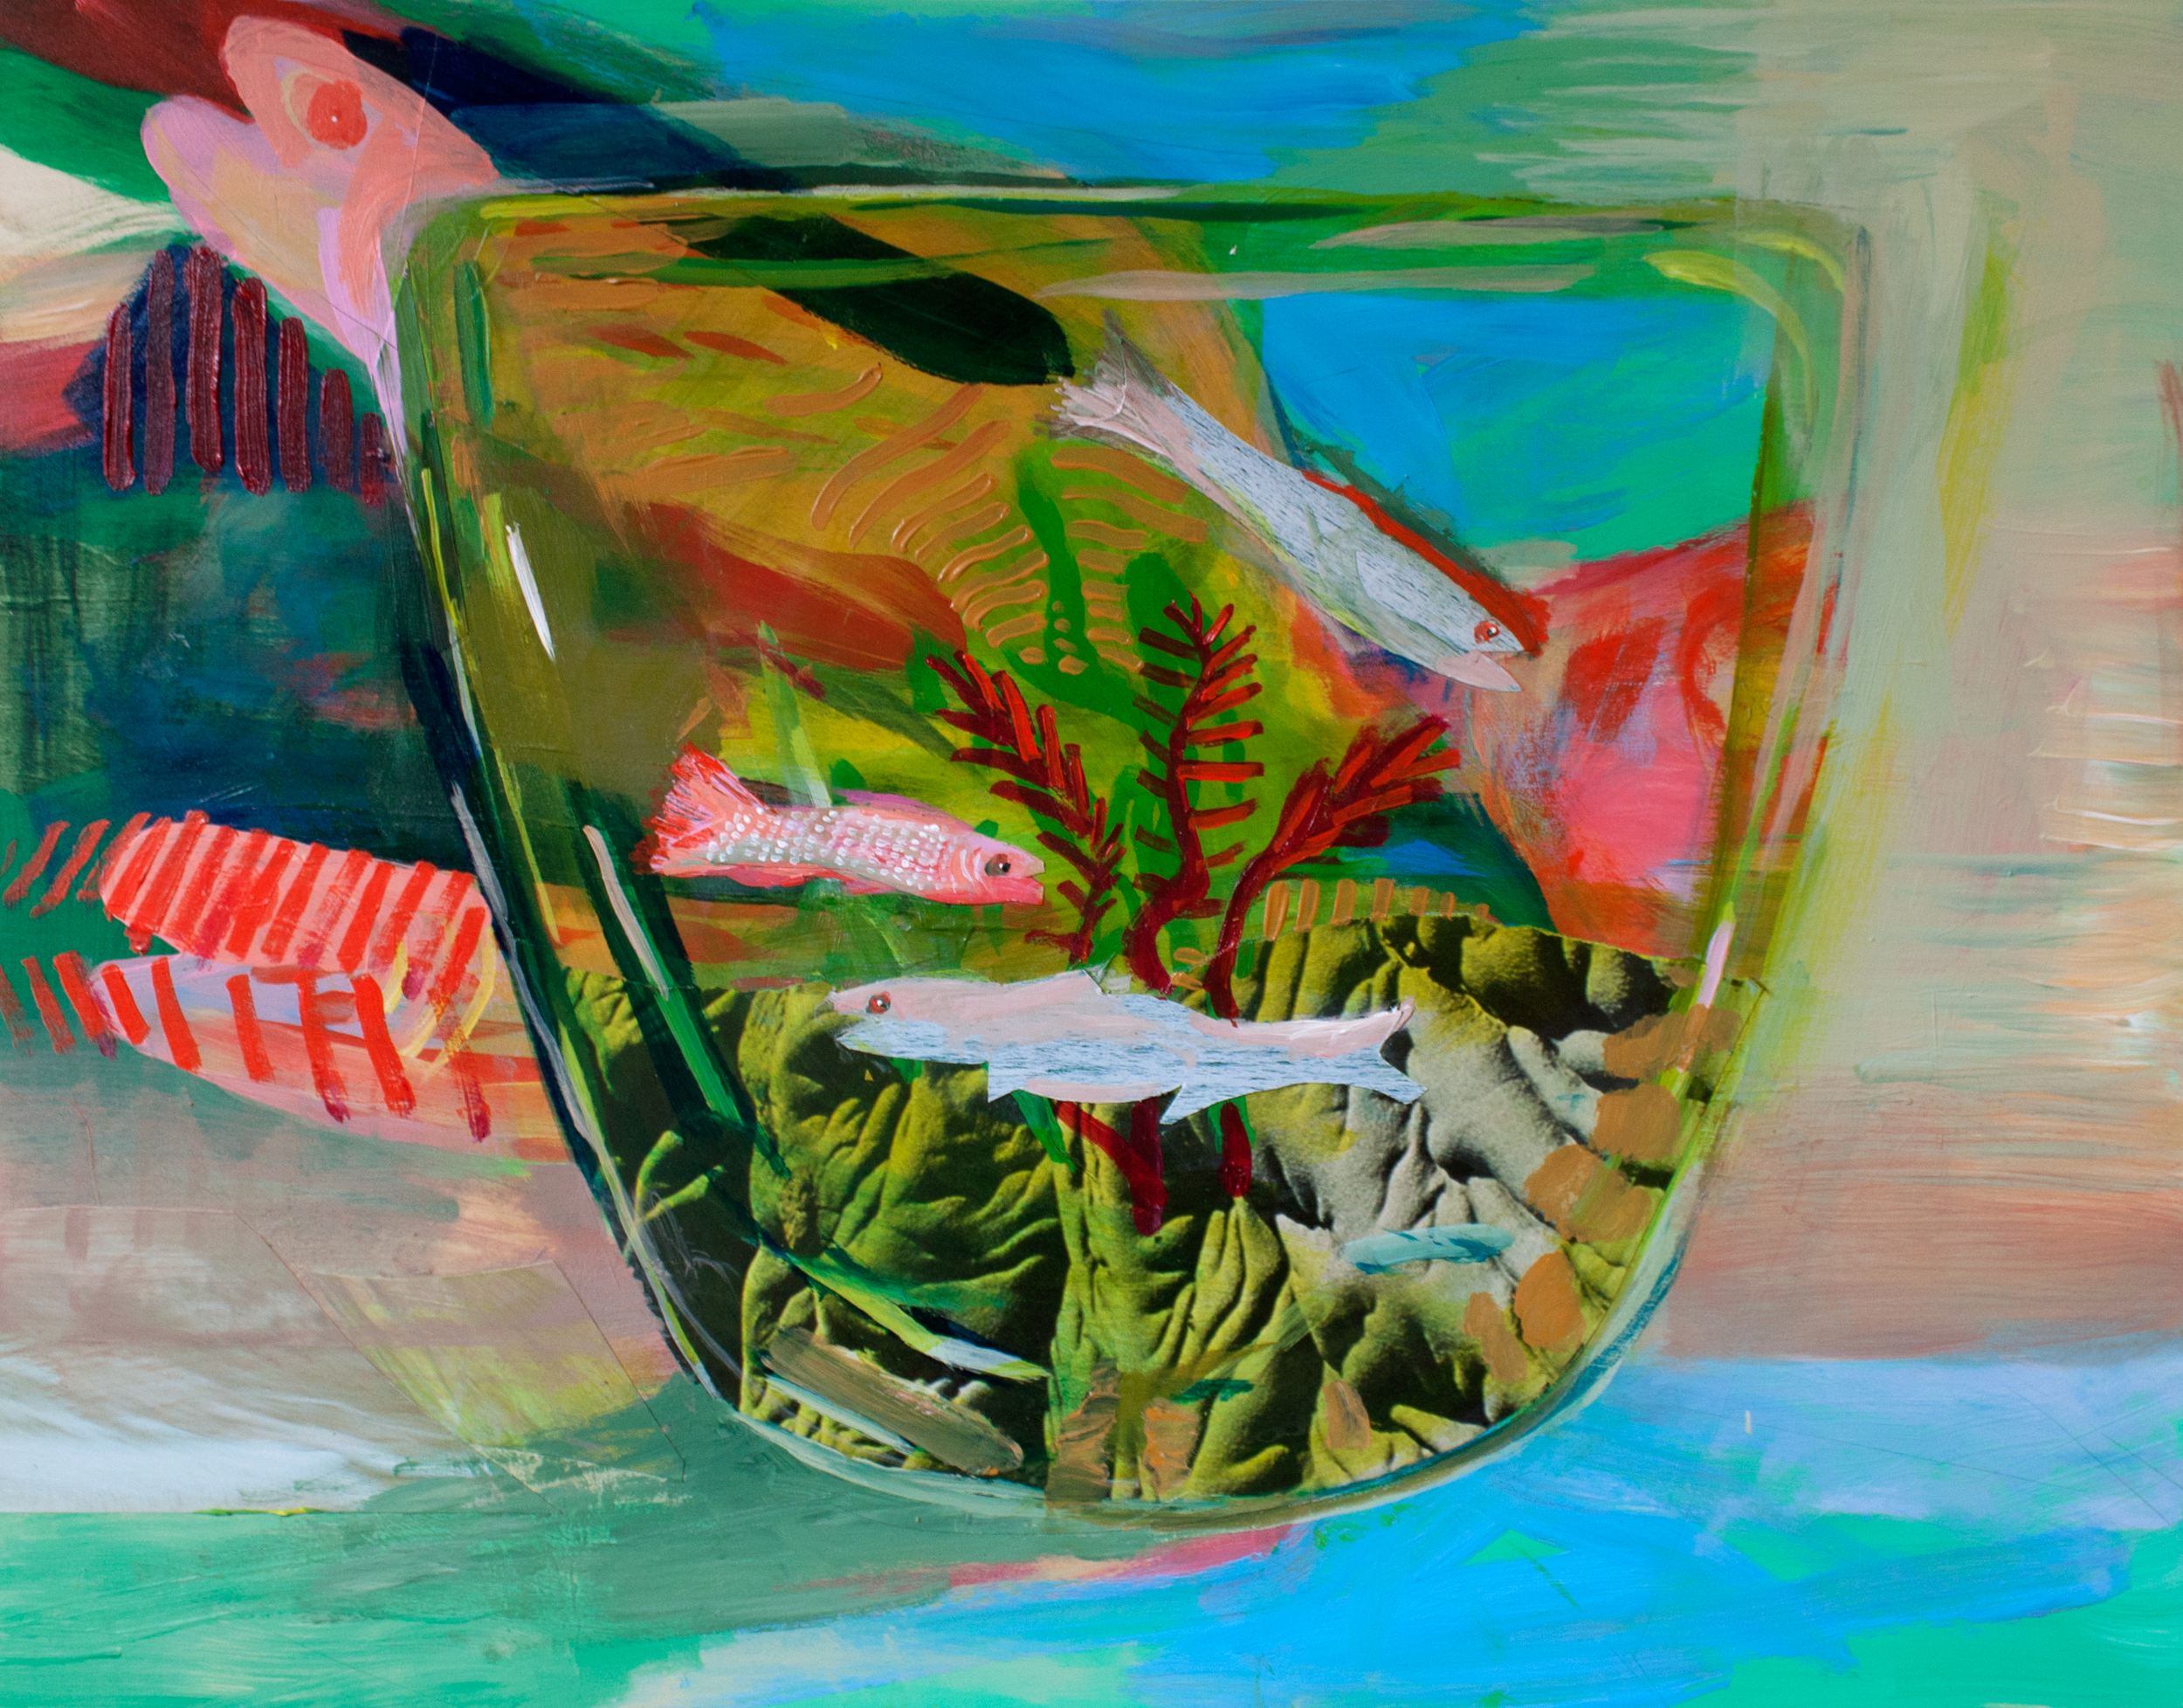   Fish Bowl  , acrylic and collage on panel, 11 x 14 inches, 2014  